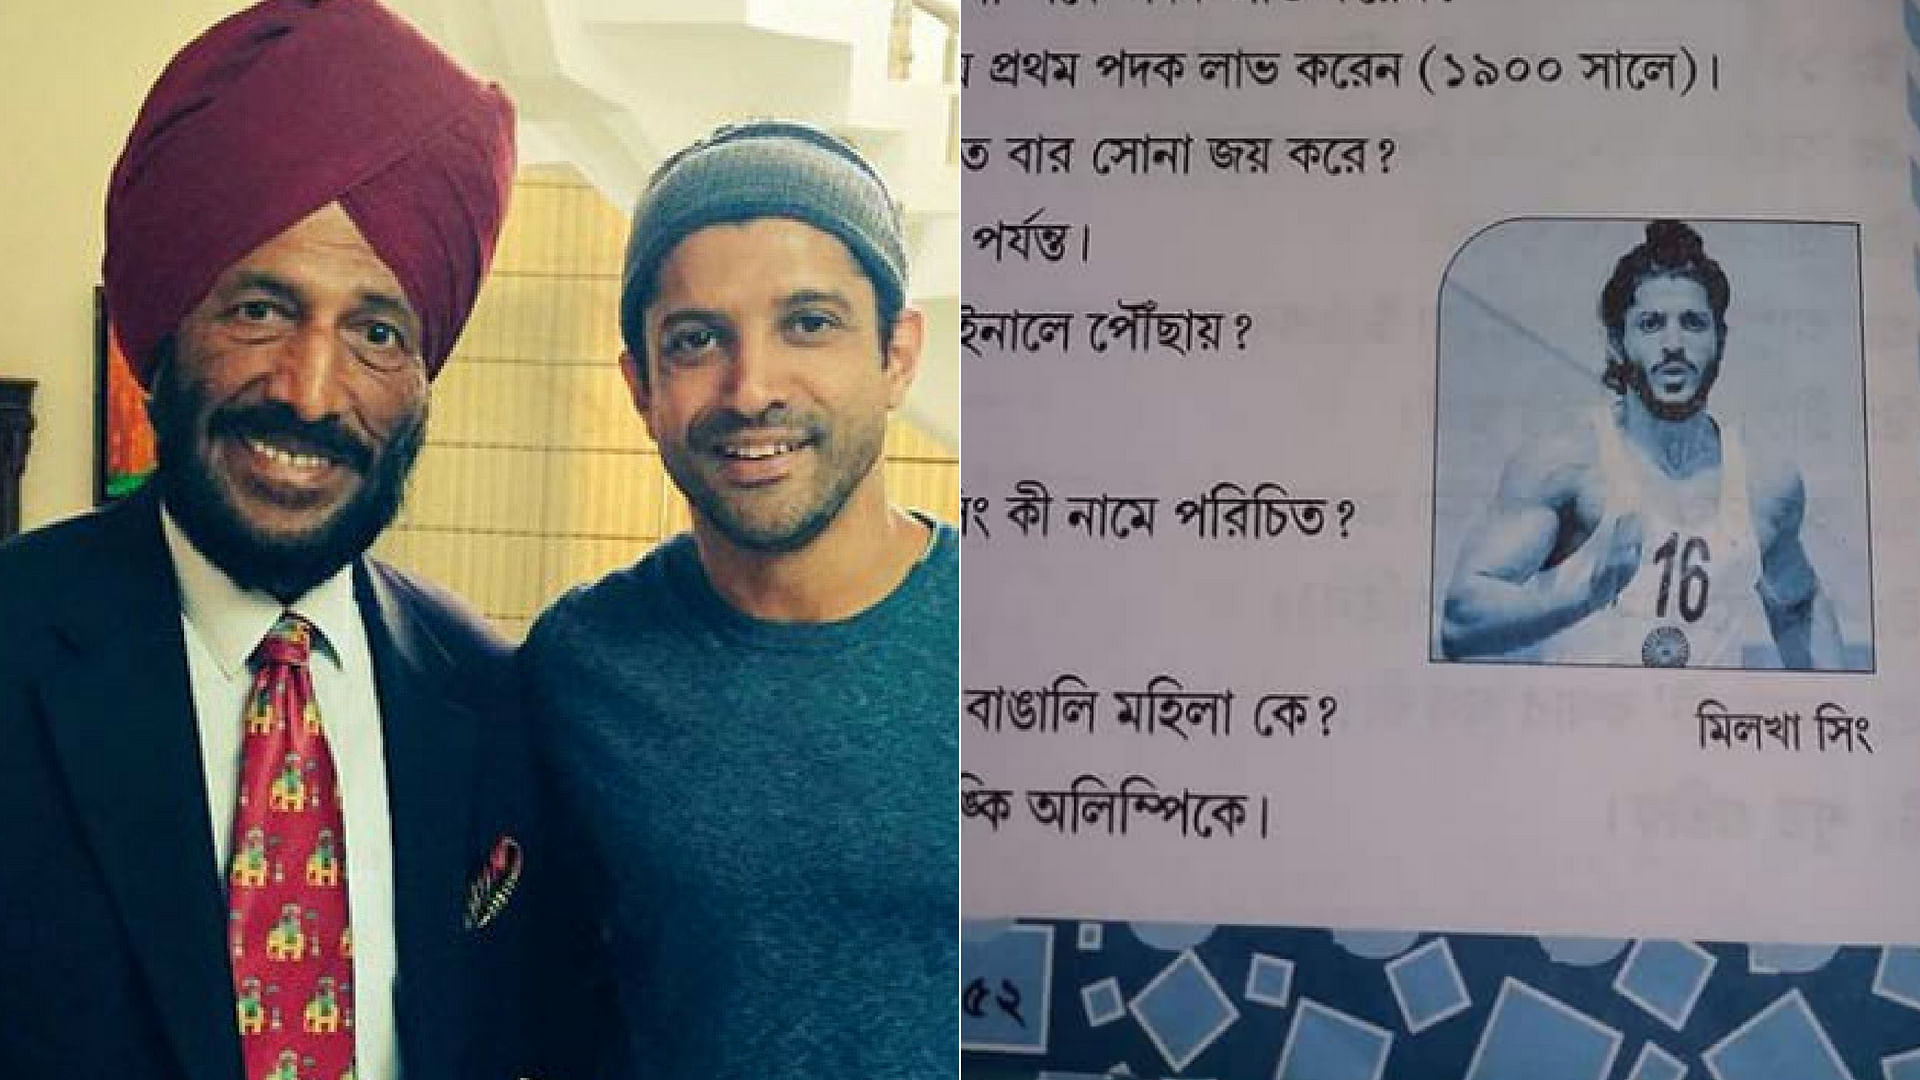 Filmmaker-actor-singer Farhan Akhtar pointed out a “glaring error” made in a West Bengal school book.